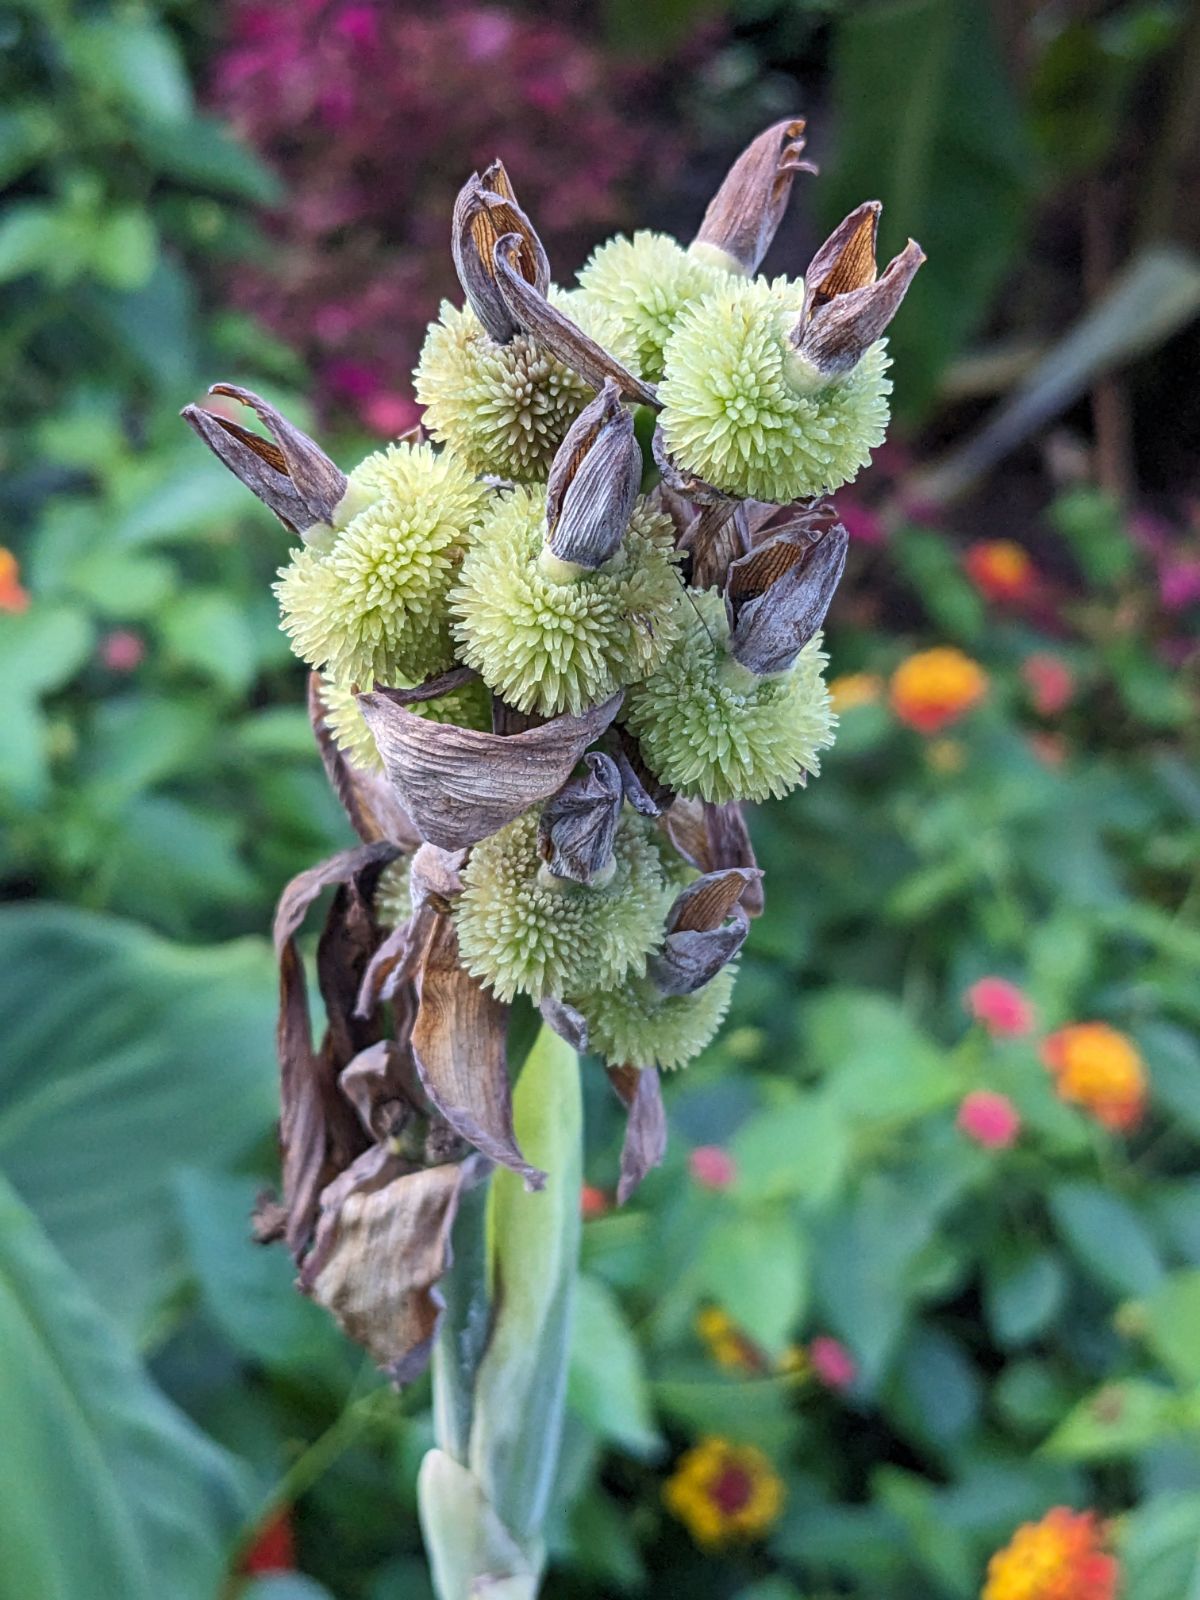 Spiky green balls on the canna plant are the beginnings of the seed pods